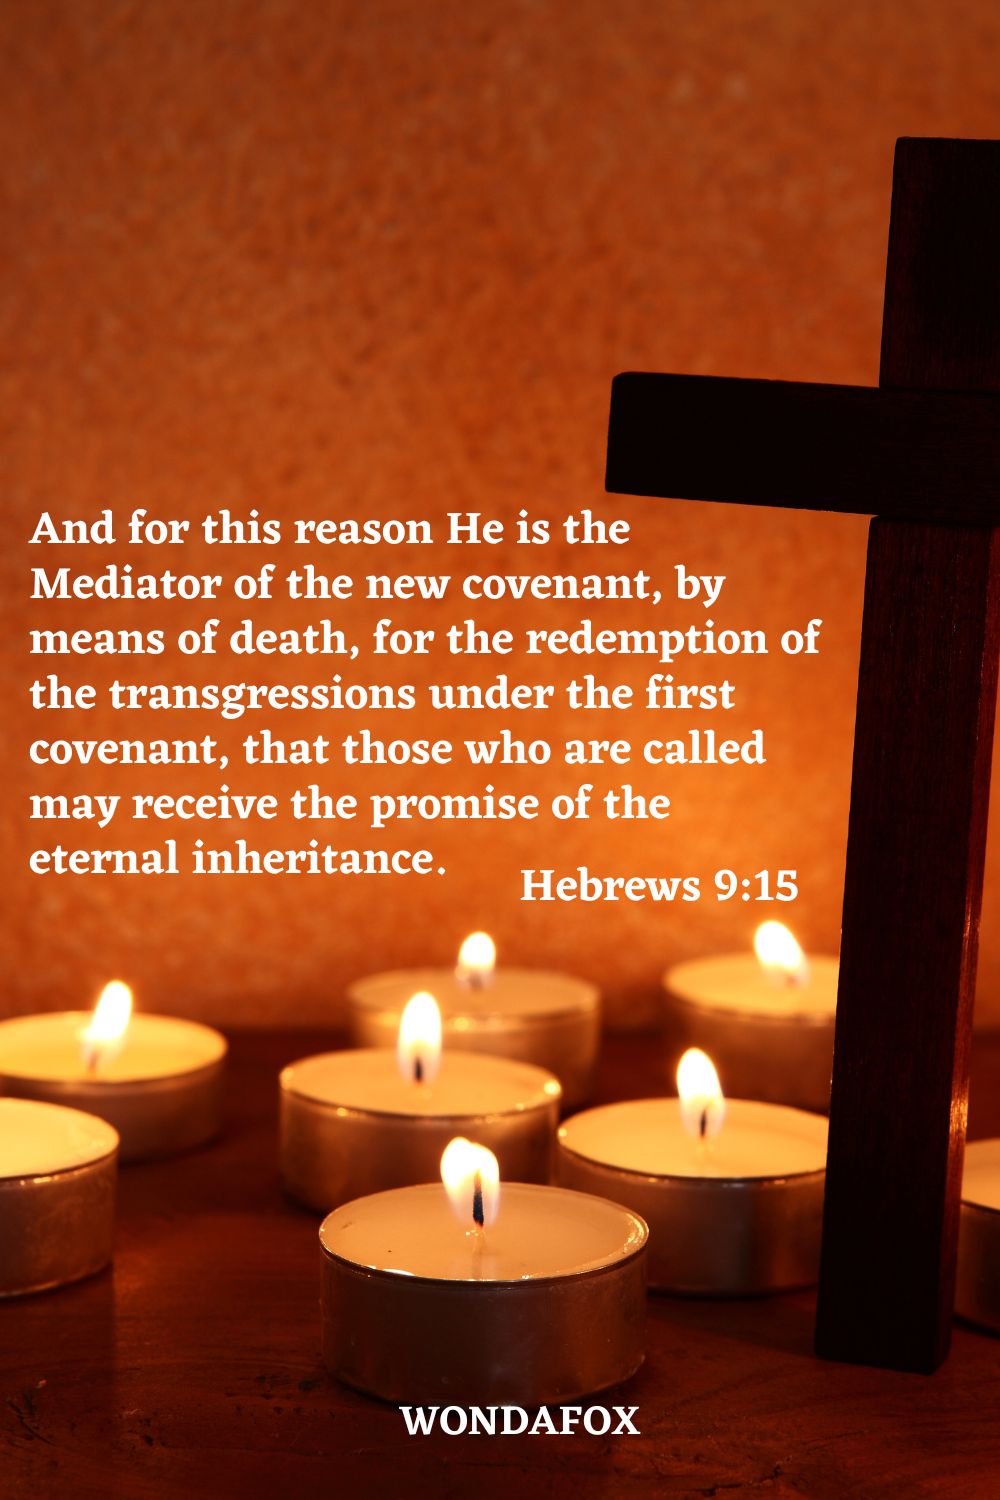 And for this reason He is the Mediator of the new covenant, by means of death, for the redemption of the transgressions under the first covenant, that those who are called may receive the promise of the eternal inheritance.
Hebrews 9:15